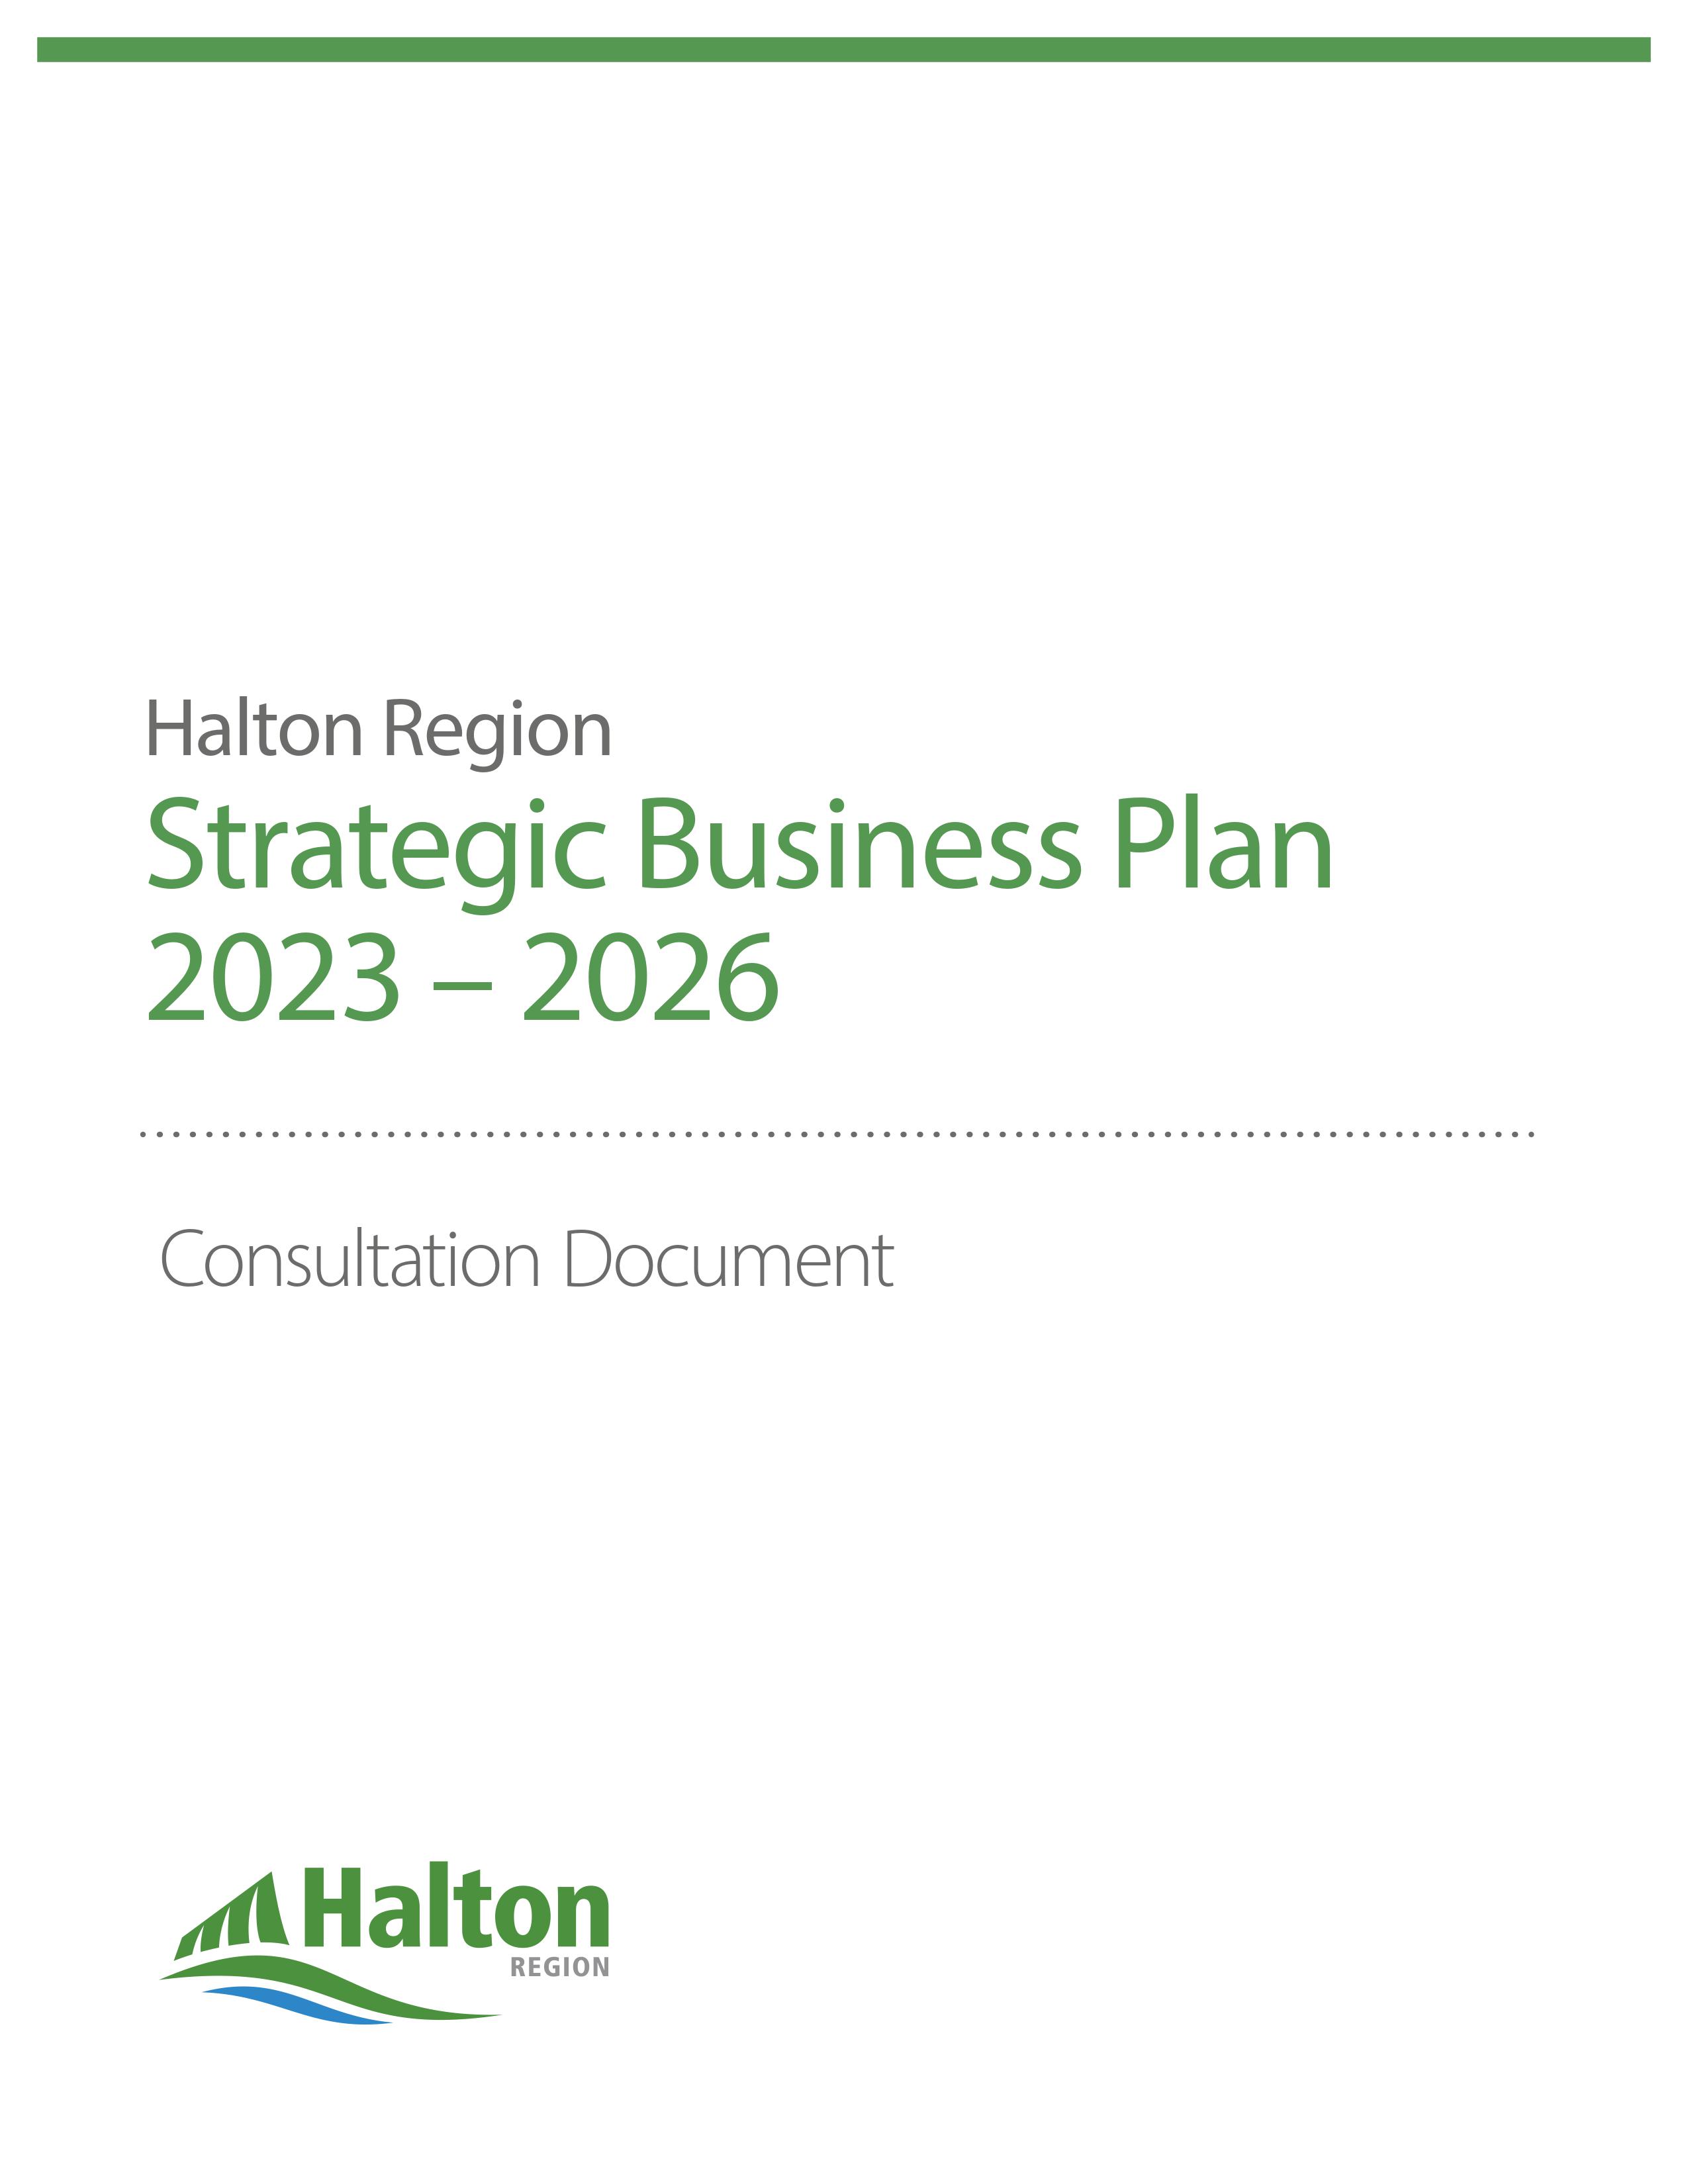 The cover of the draft 2023-2026 Strategic Business Plan, developed as a Consultation Document to help the public provide feedback. You can click this image to download the PDF or access the file through other links in the page content.